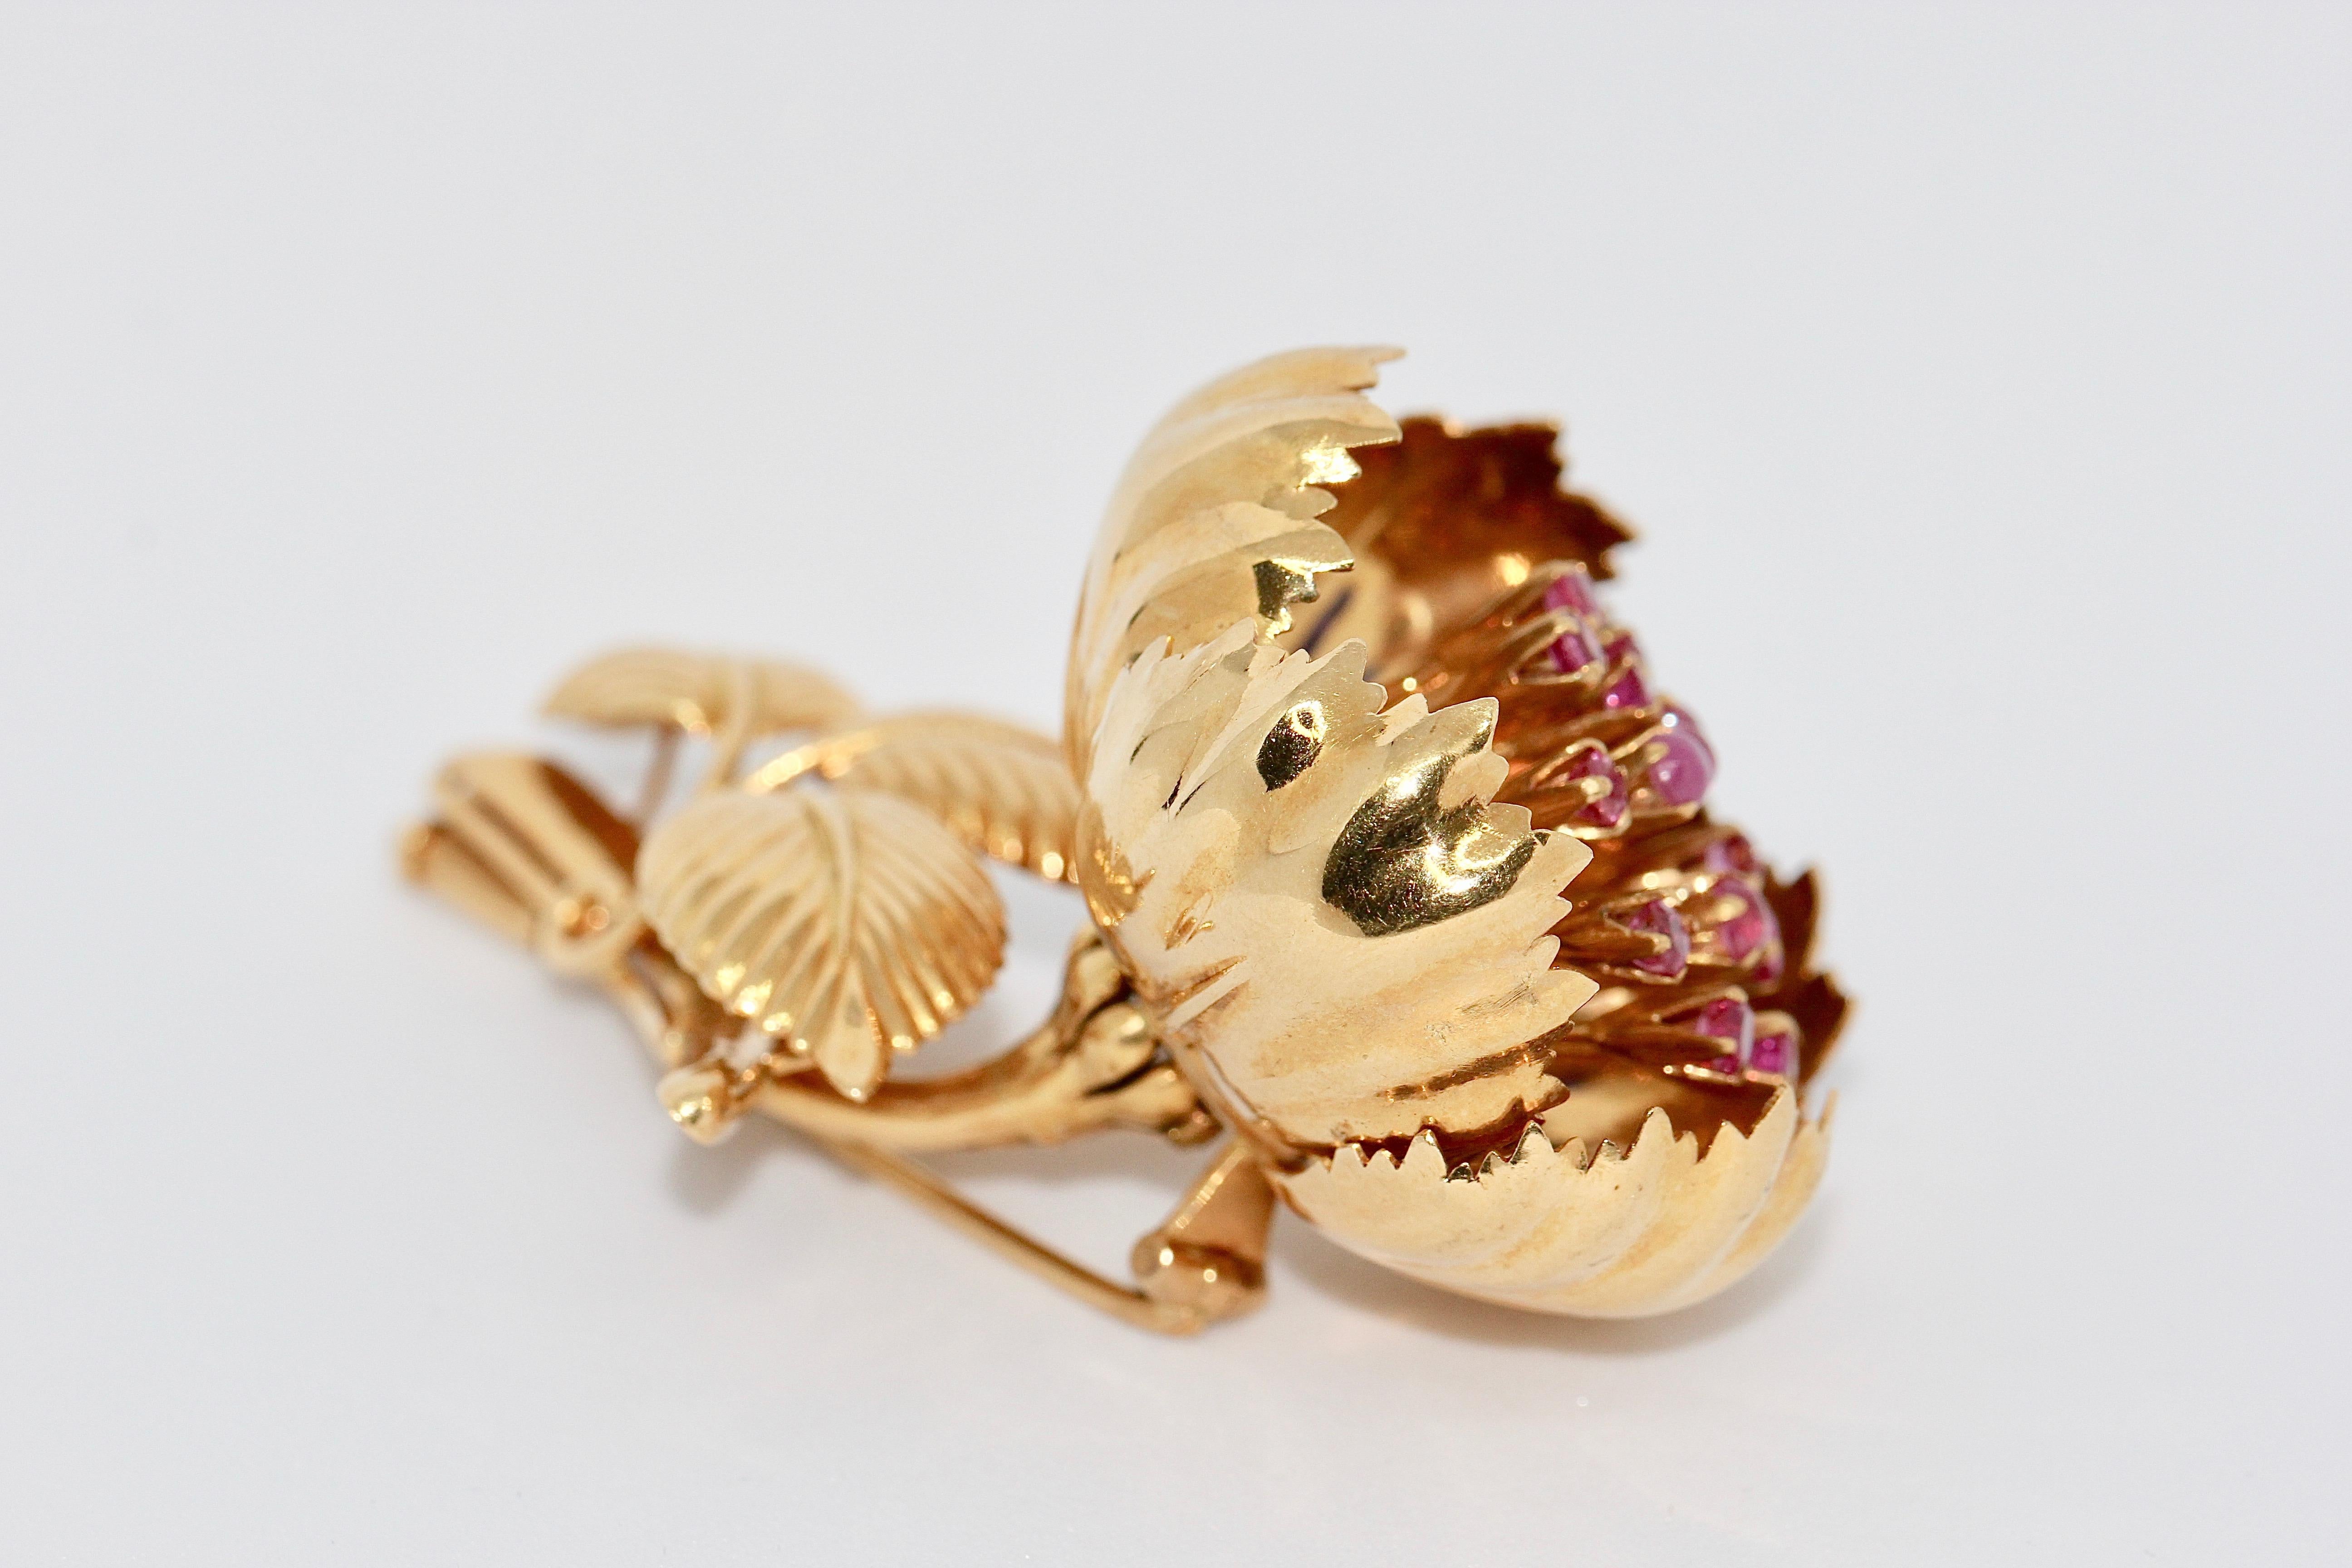 Enchanting, 18 Karat Floral Gold Brooch with Movable Petals, Rubies and Enamel For Sale 1